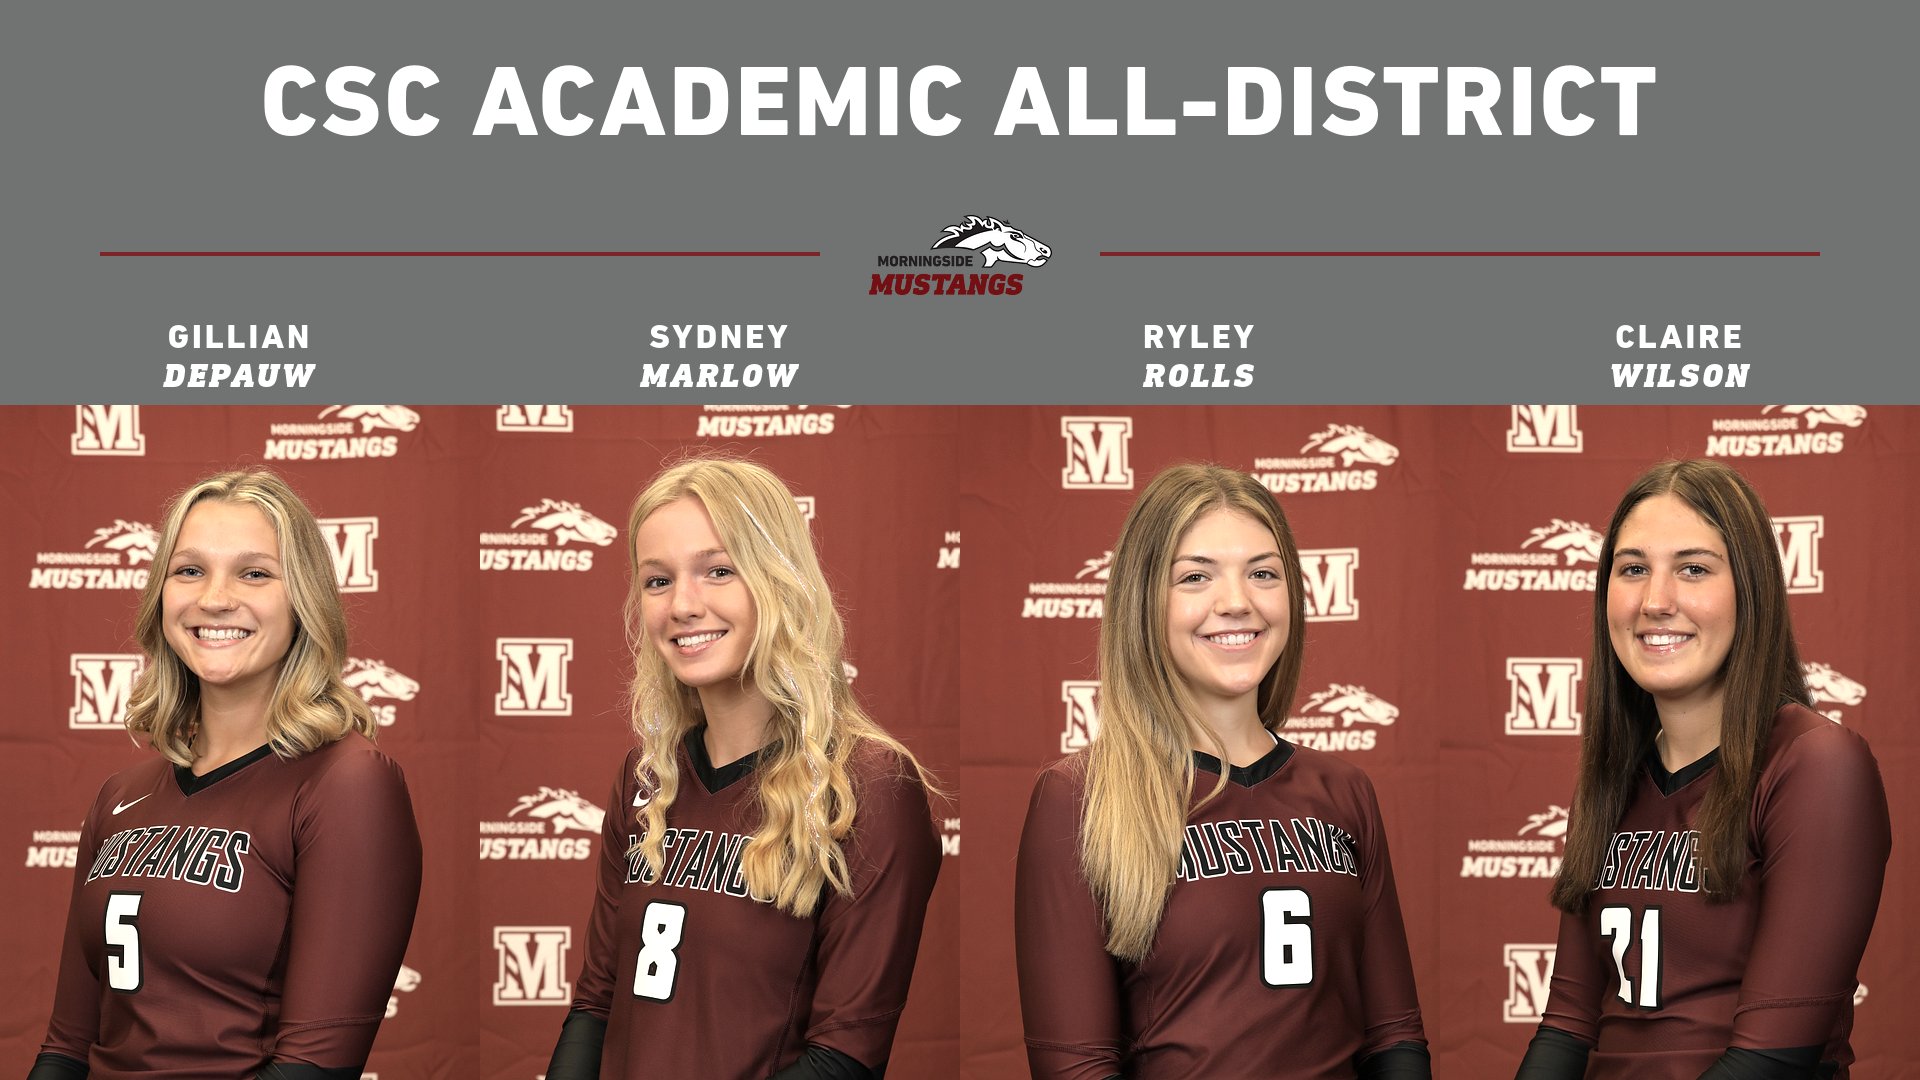 DePauw, Marlow, Rolls, Wilson named CSC Academic All-District